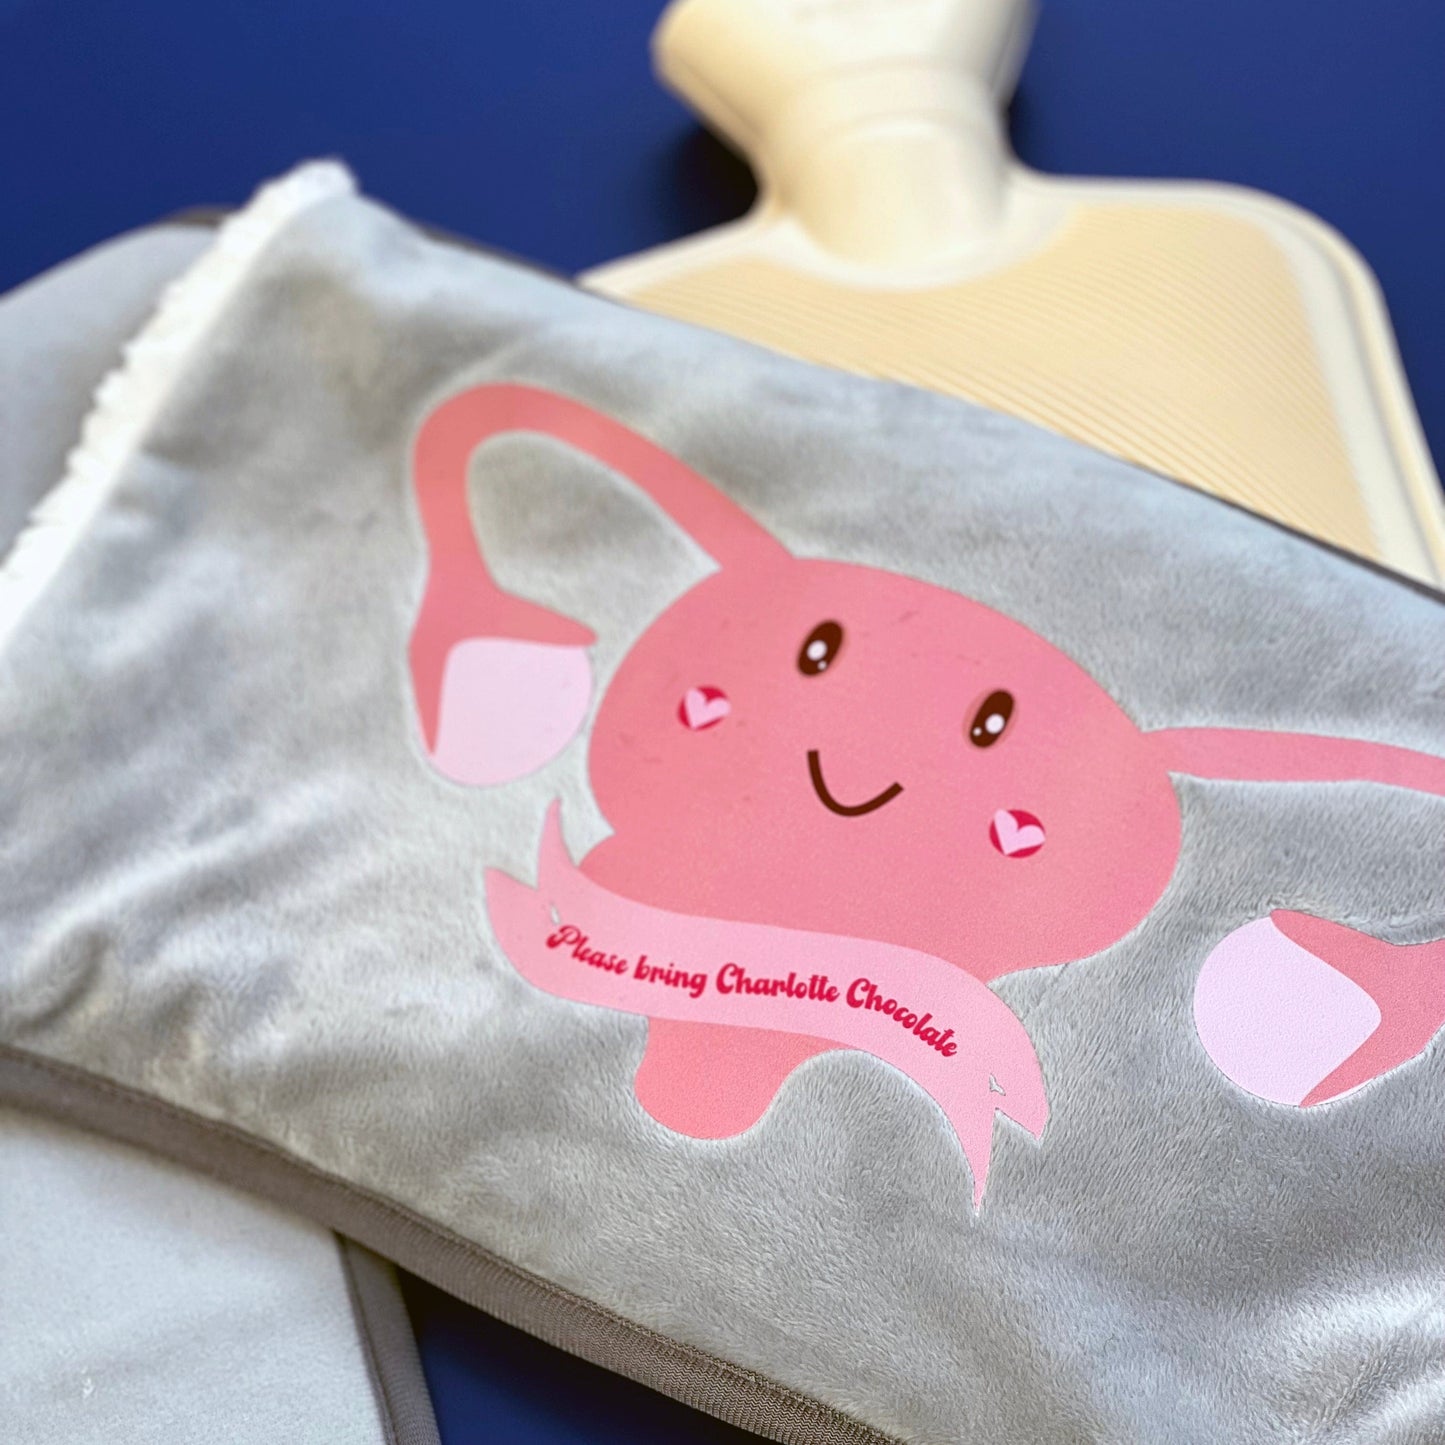 Wearable Hot Water Bottle With Uterus Design